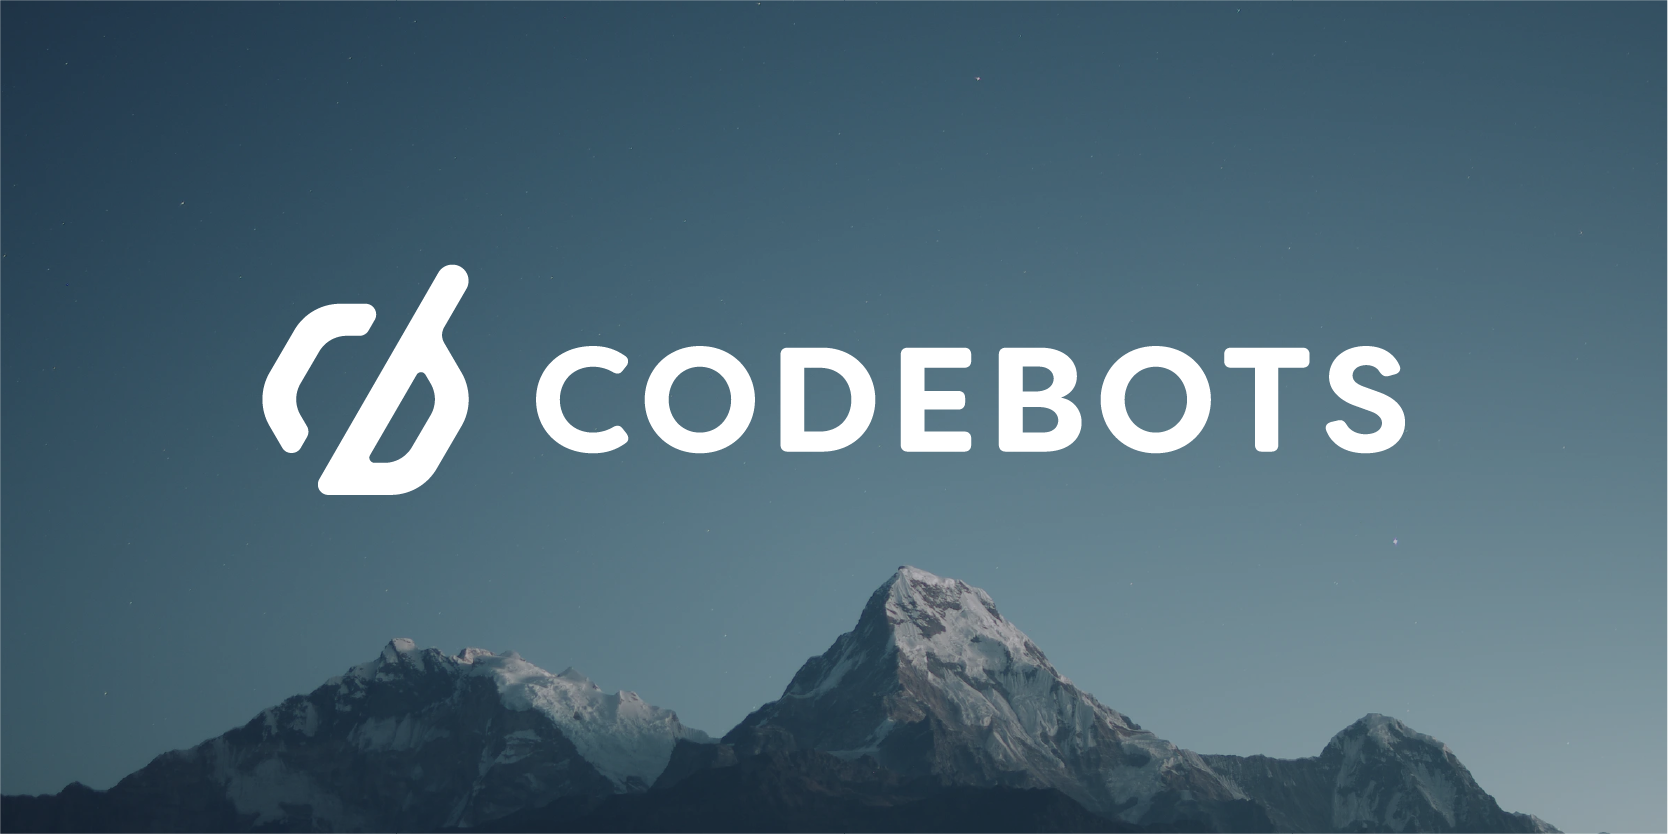 Codebots picture-do logo